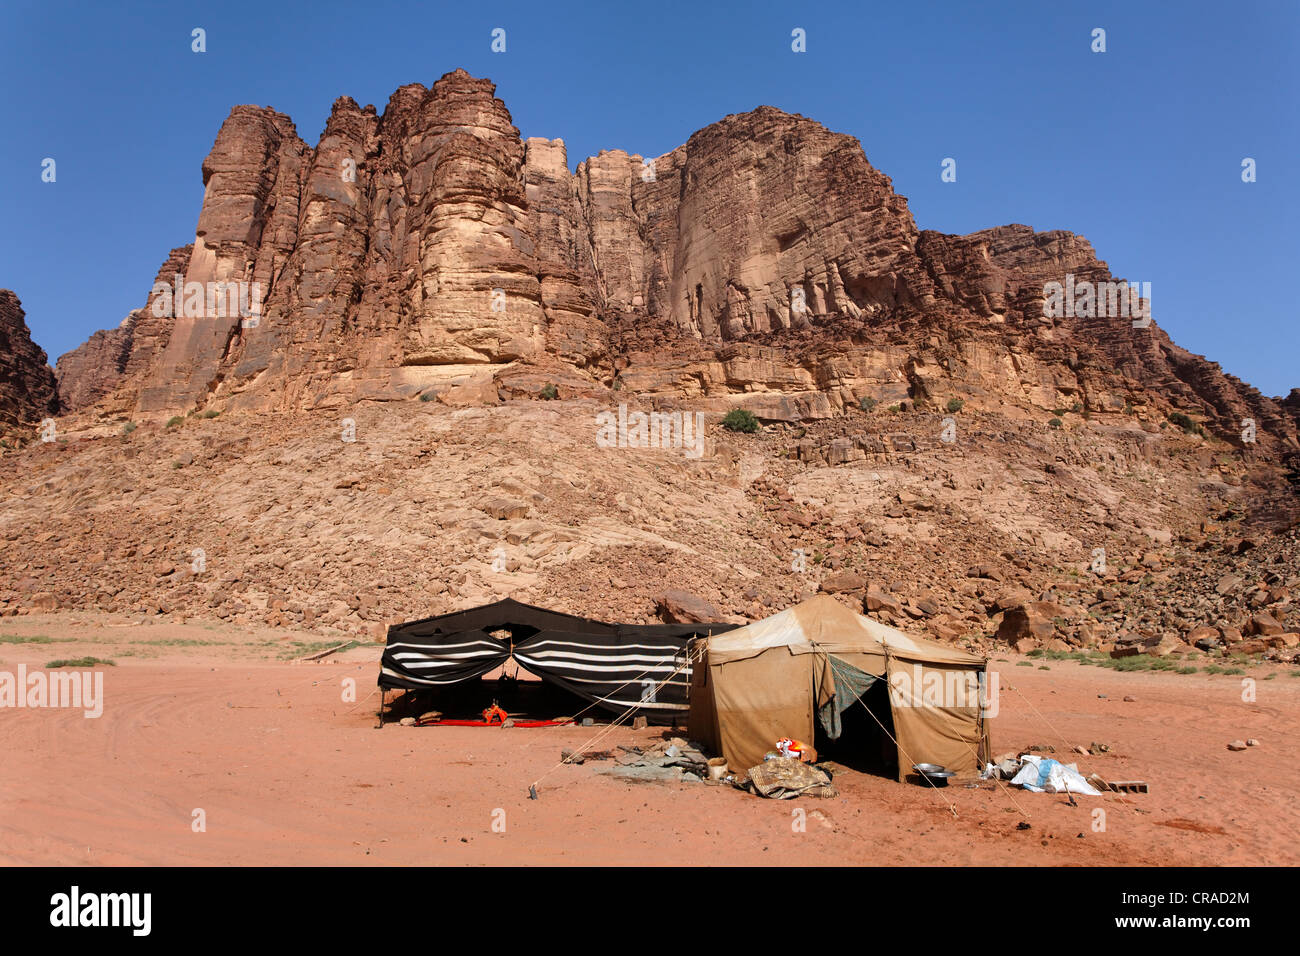 Mountain with Lawrence's Spring, Bedouin camp, Lawrence of Arabia, desert, Wadi Rum, Hashemite Kingdom of Jordan, Middle East Stock Photo